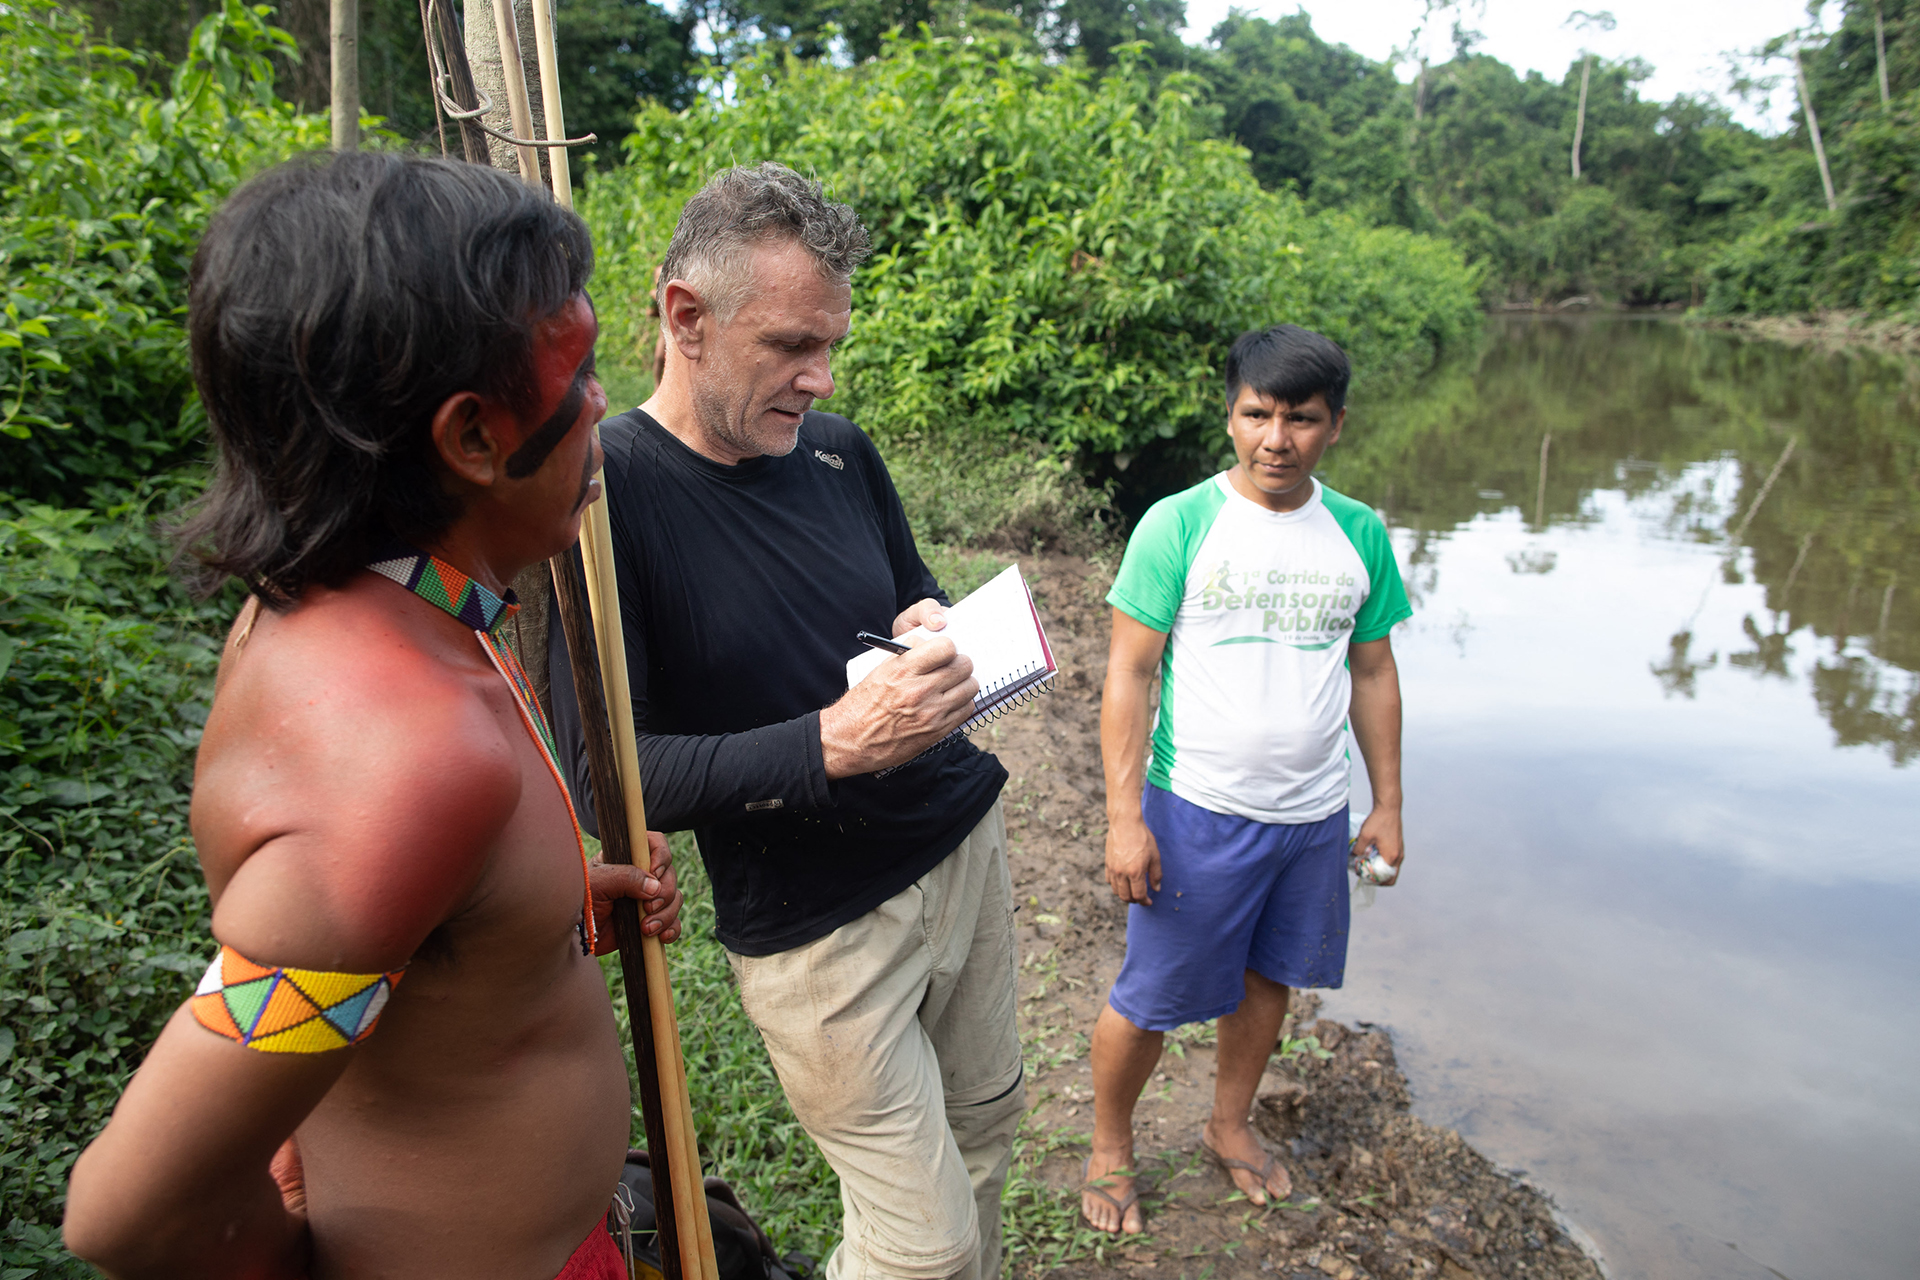 The periodical britnic Dom Phillips is one of the lowest dosages in Amazonas (Joao Laet / AFP)